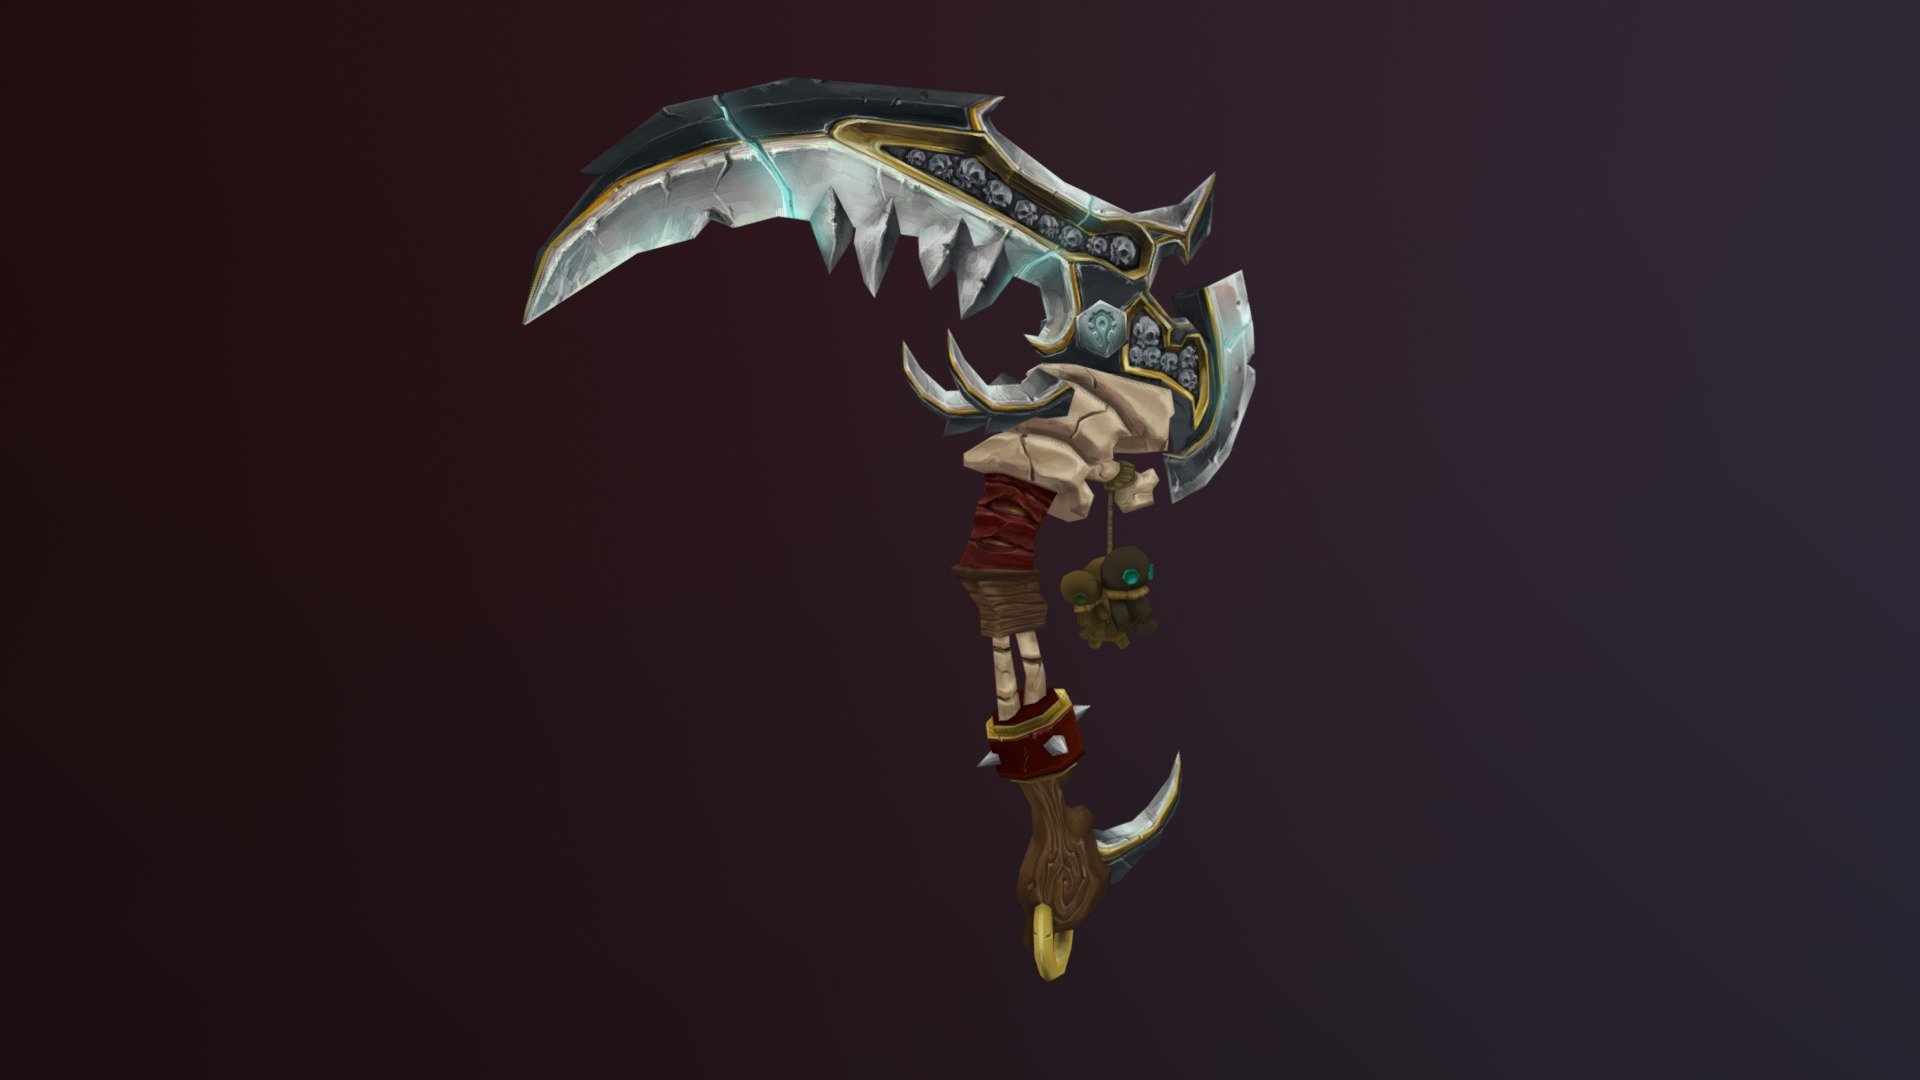 Scythe i had to make for my assignment of weaponcraft for my GameArt course.

We had to design a weapon based on the world of World of Warcraft, then model and texture it 3d model